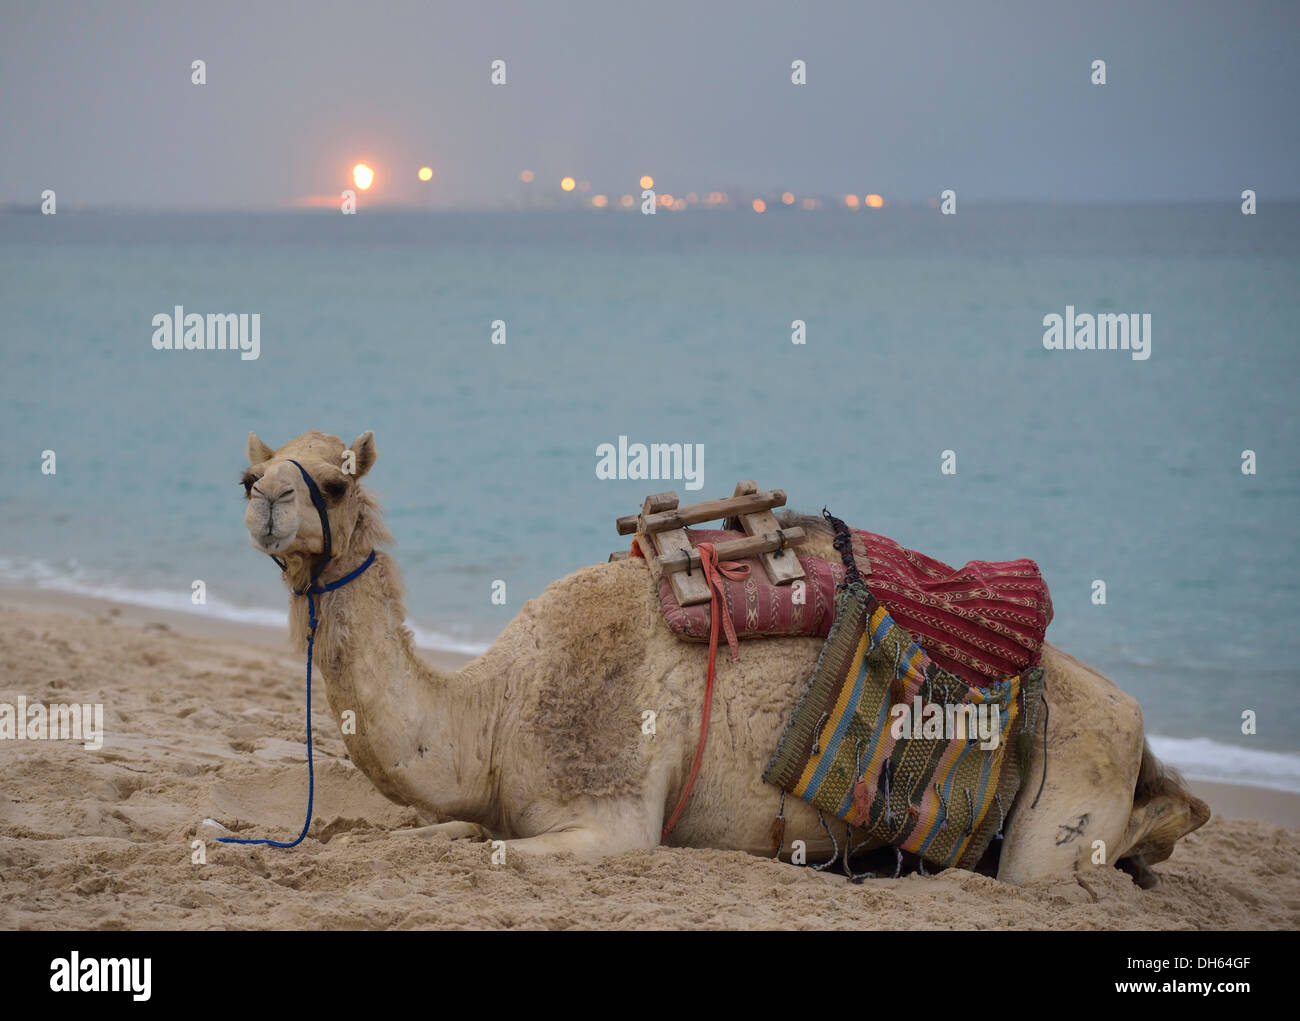 Camel lying on the beach, Inland Sea, desert miracle of Qatar, petrochemical plant, gas production facility at back Stock Photo